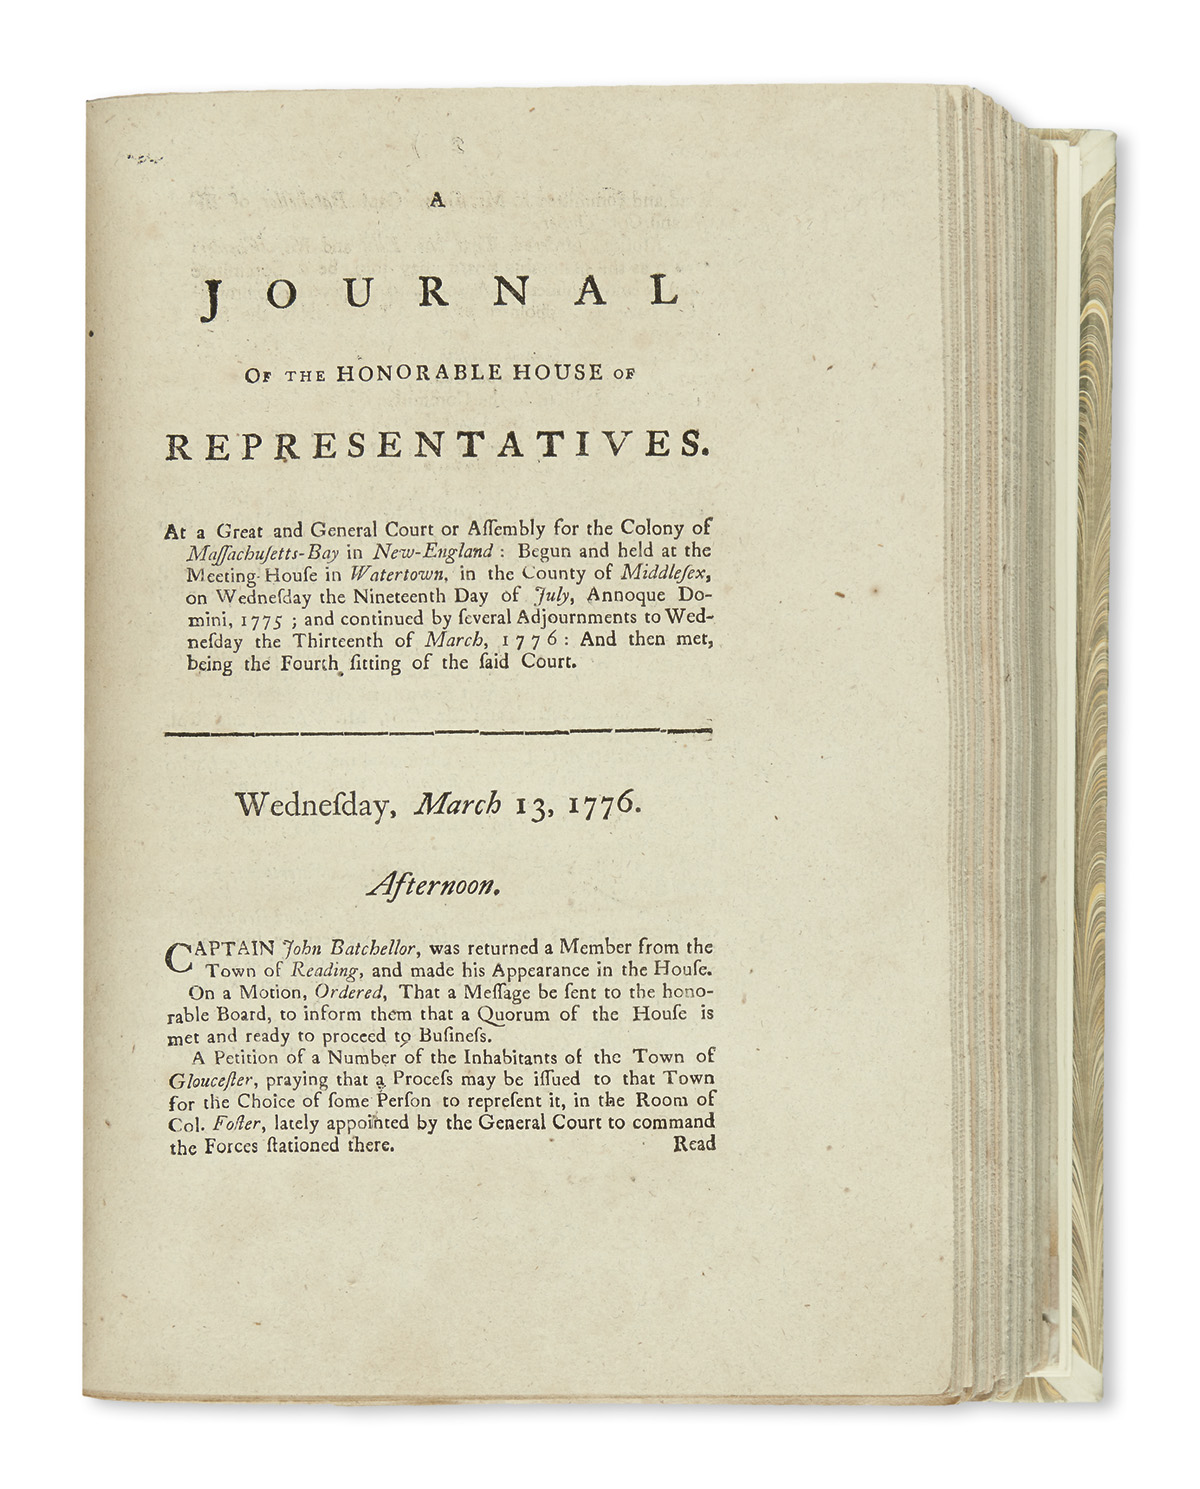 (AMERICAN REVOLUTION--1775.) A Journal of the Honorable House of Representatives . . . of Massachusetts-Bay.